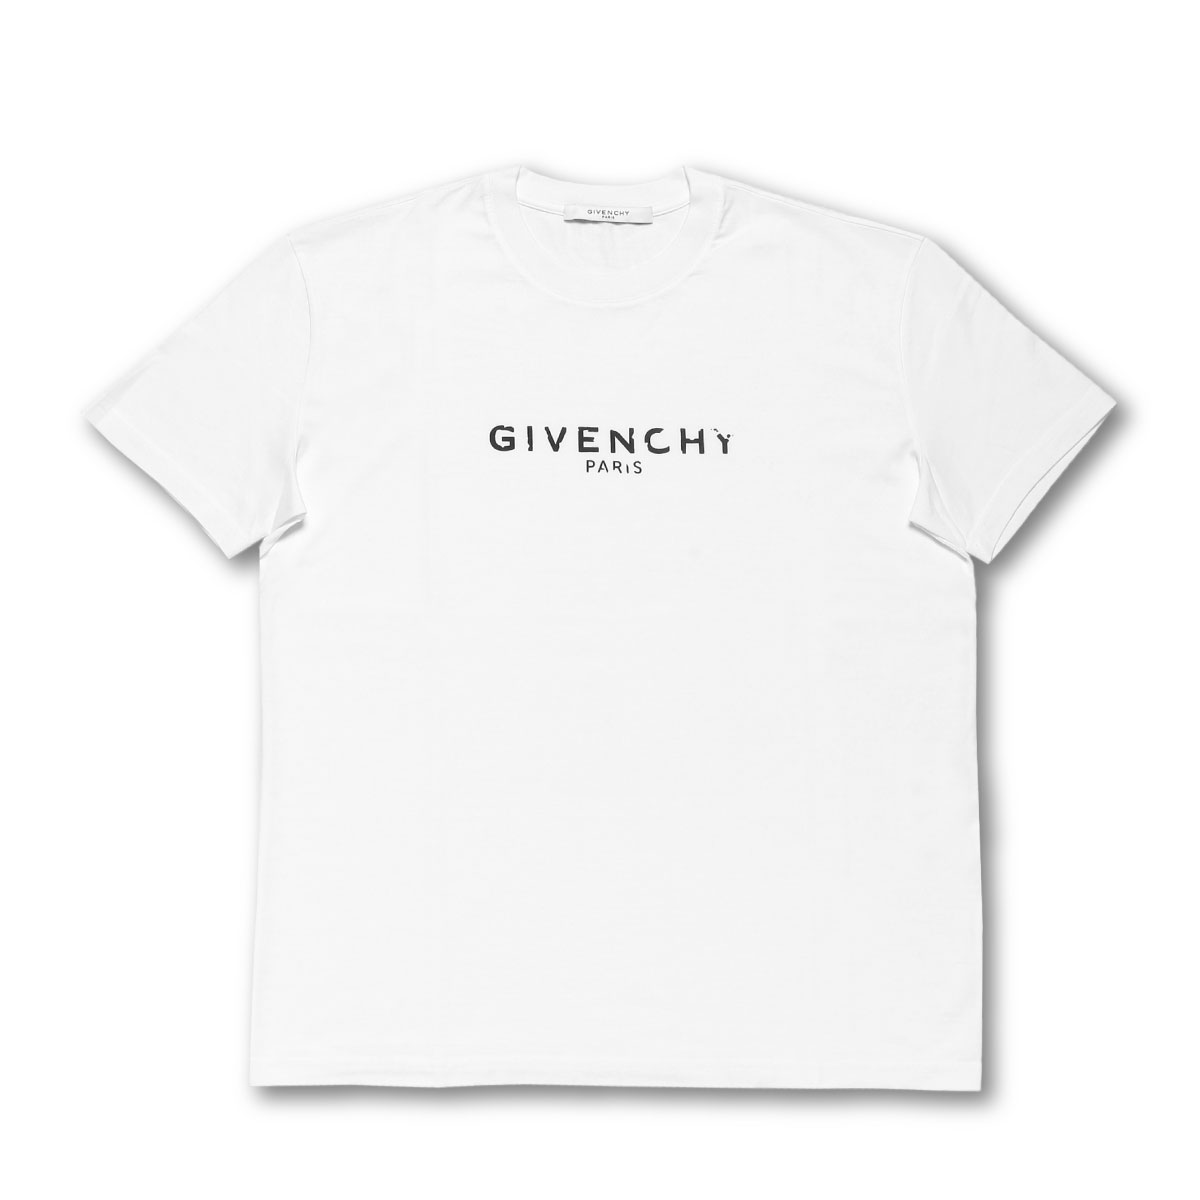 givenchy white top